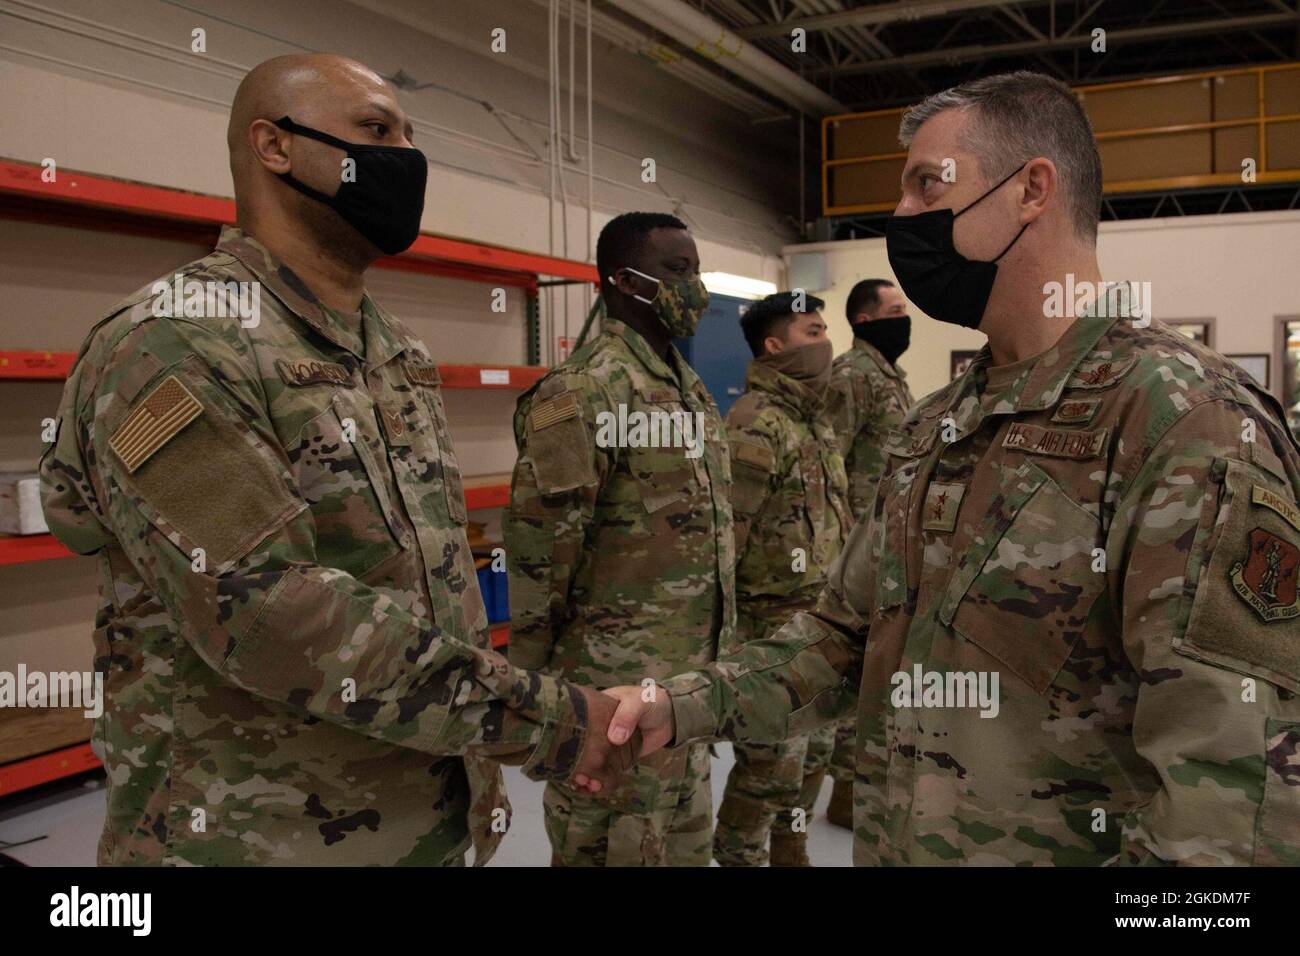 Maj. Gen. Torrence Saxe, adjutant general of the Alaska National Guard, right, awards Tech Sgt. Steven Woodson a coin during a visit to Eielson Air Force Base, Alaska, March 23, 2021. Stock Photo